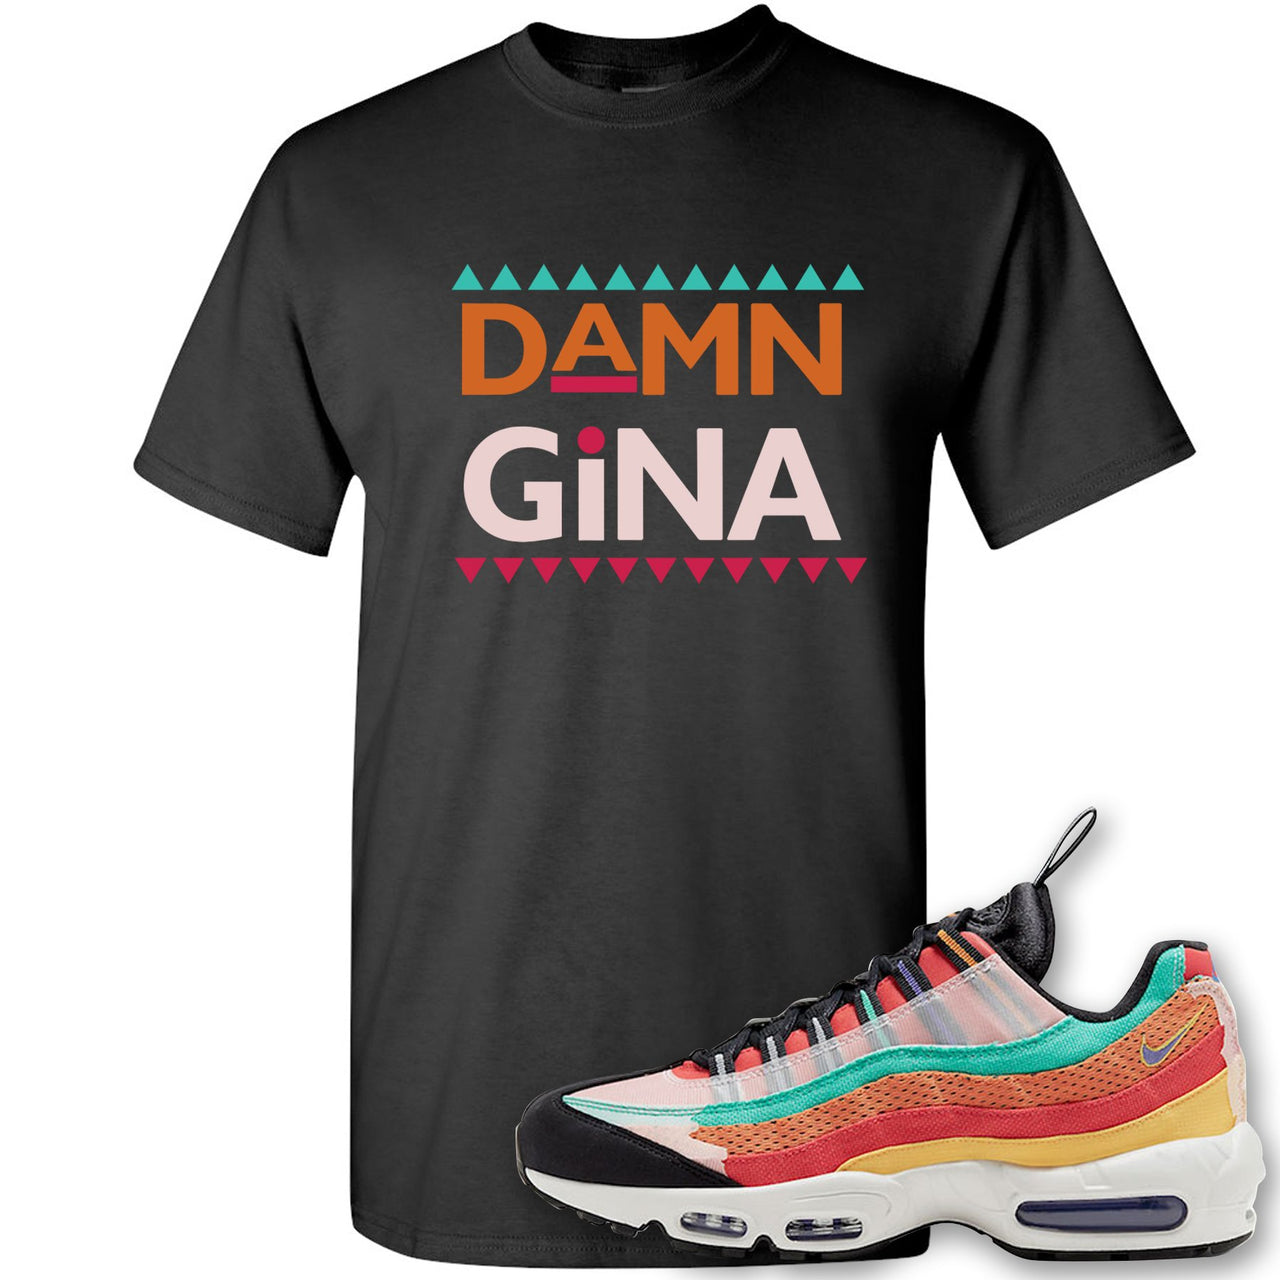 Air Max 95 Black History Month Sneaker Black T Shirt | Tees to match Nike Air Max 95 Black History Month Shoes | Damn Gina